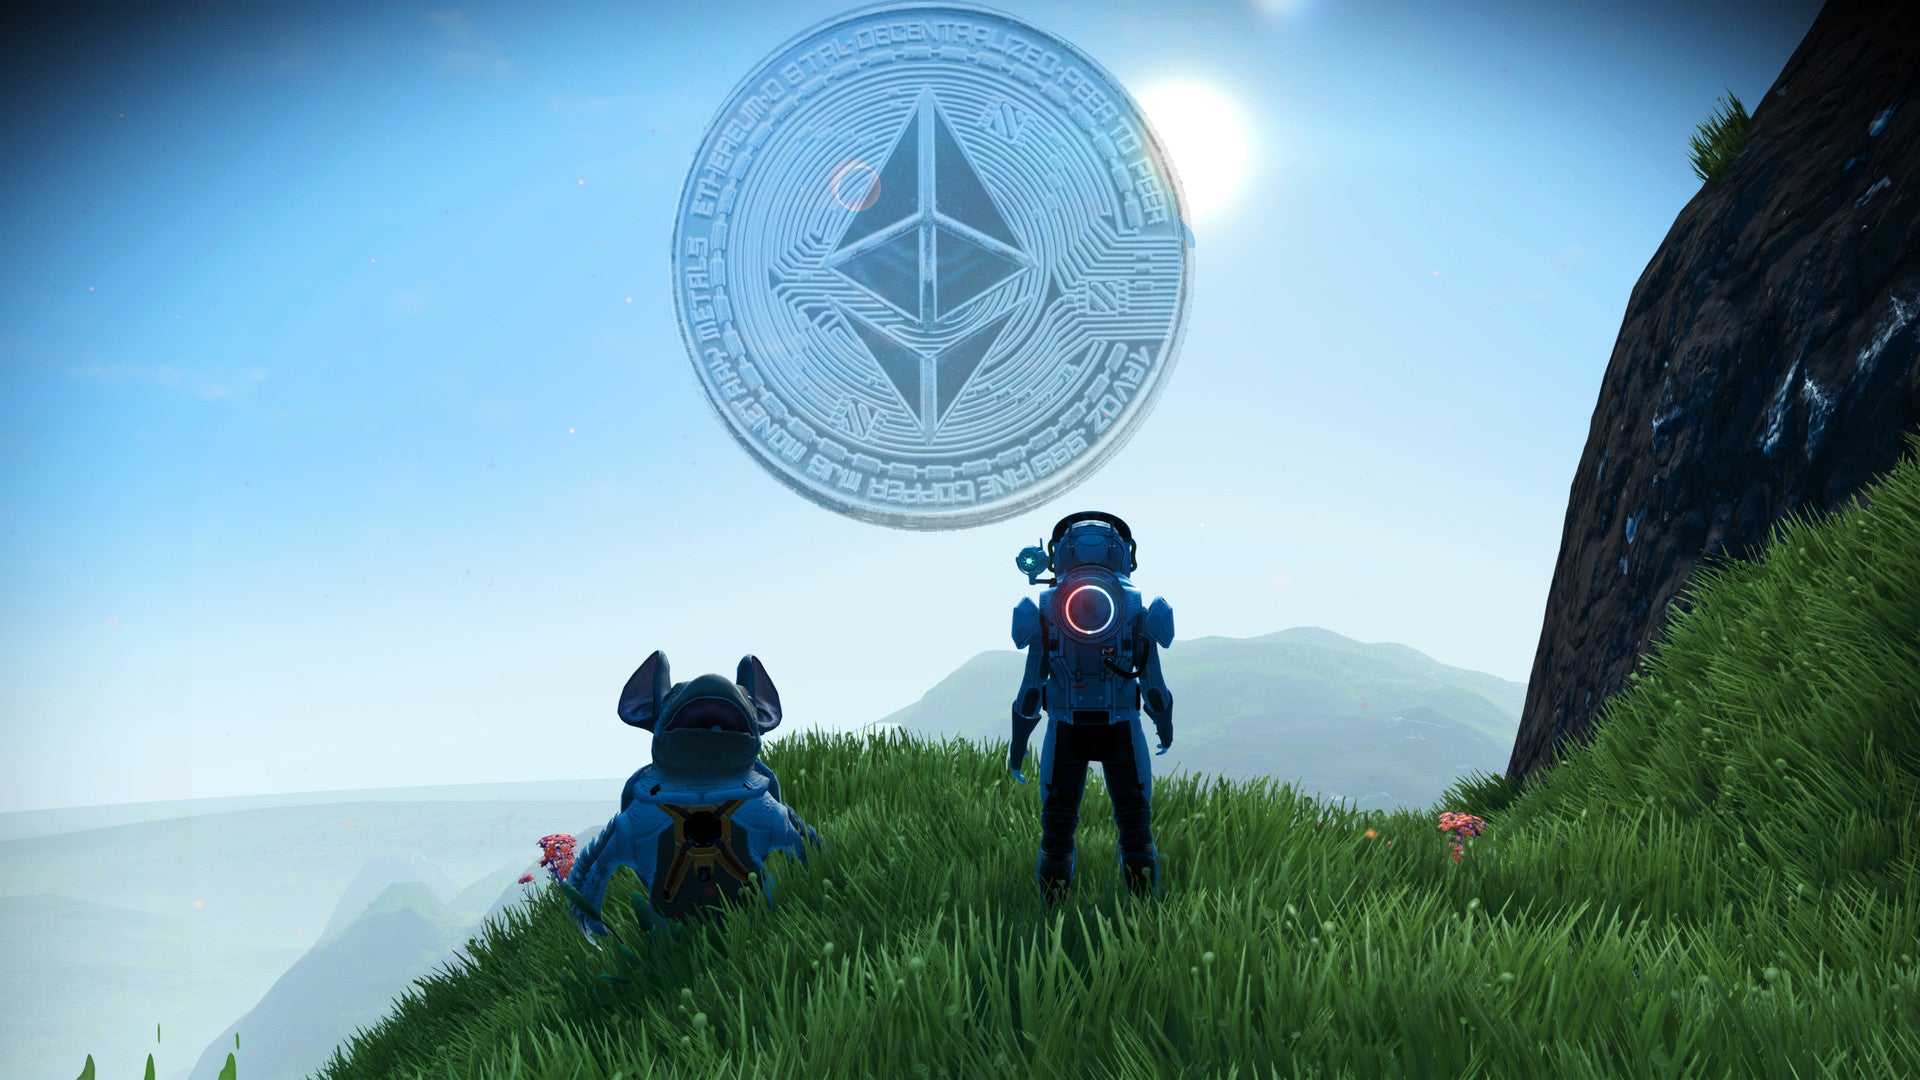 A scene from No Man's Sky where a player stands on a hill looking at a distant planet in a hazy blue sky, except the planet is an Etherium coin